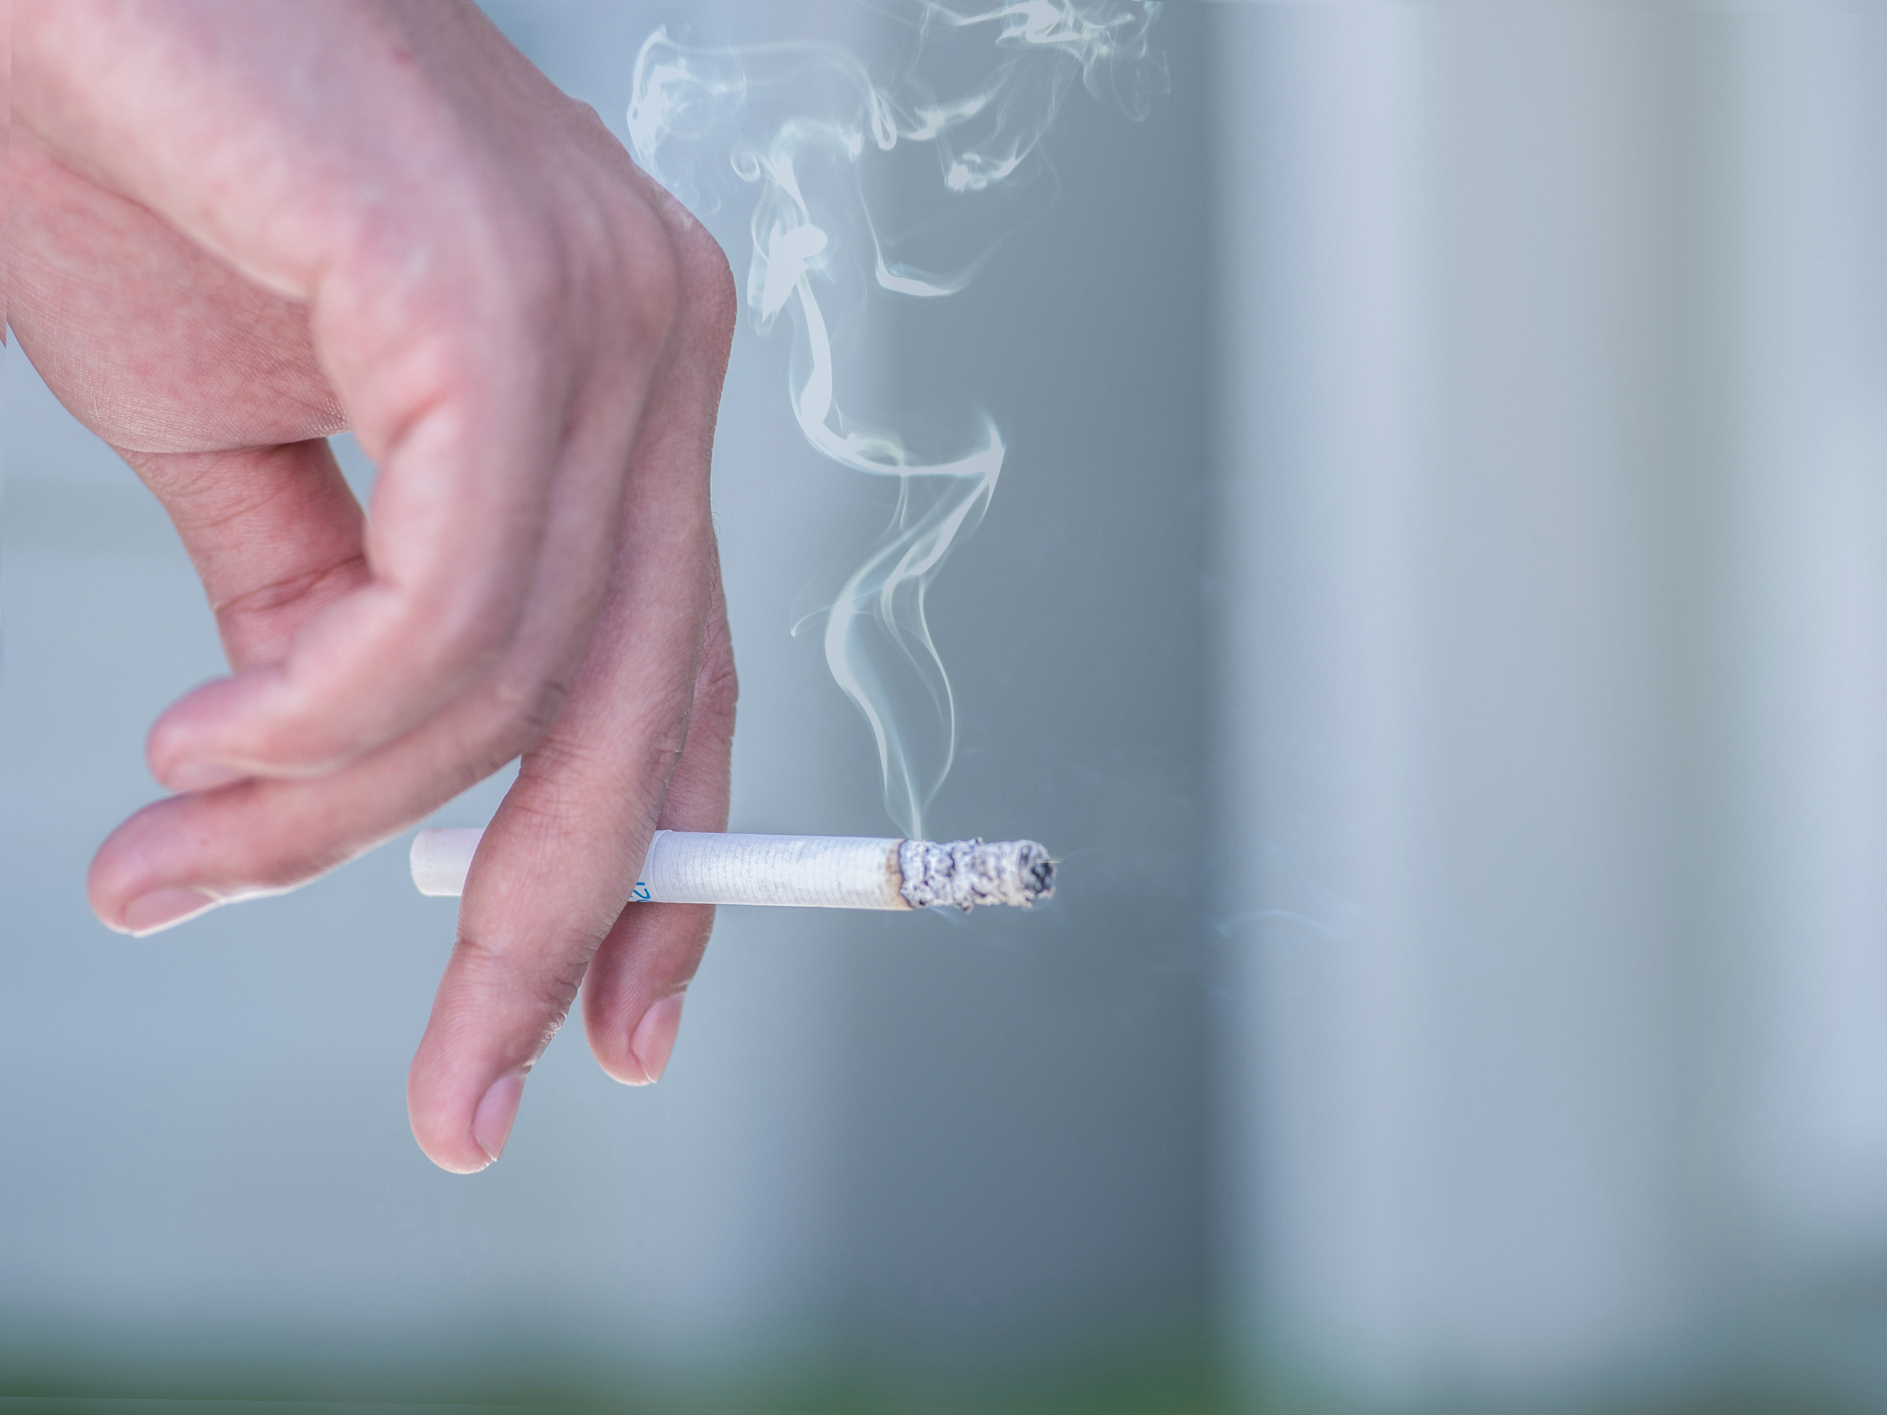 Try this smelly approach to kicking your cigarette habit for good